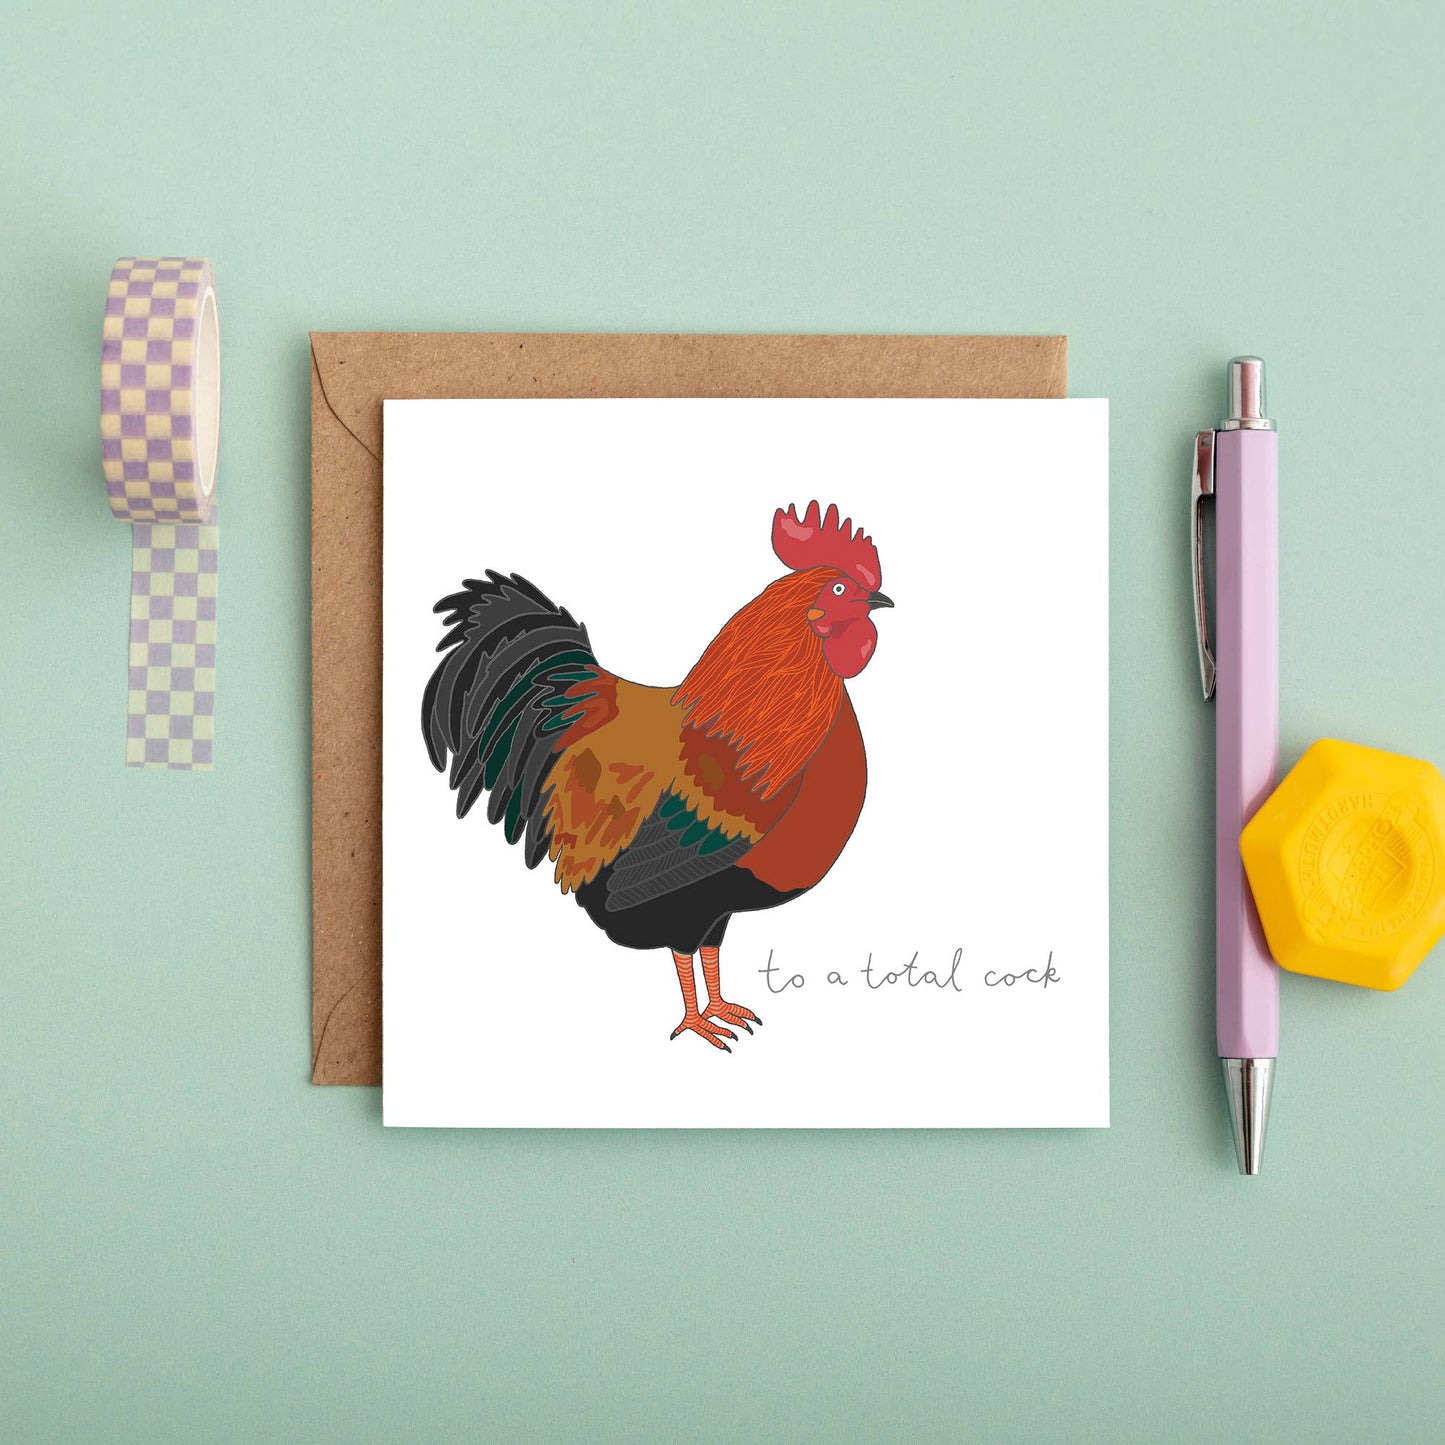 You've Got Pen on Your Face - Cock Greeting Card